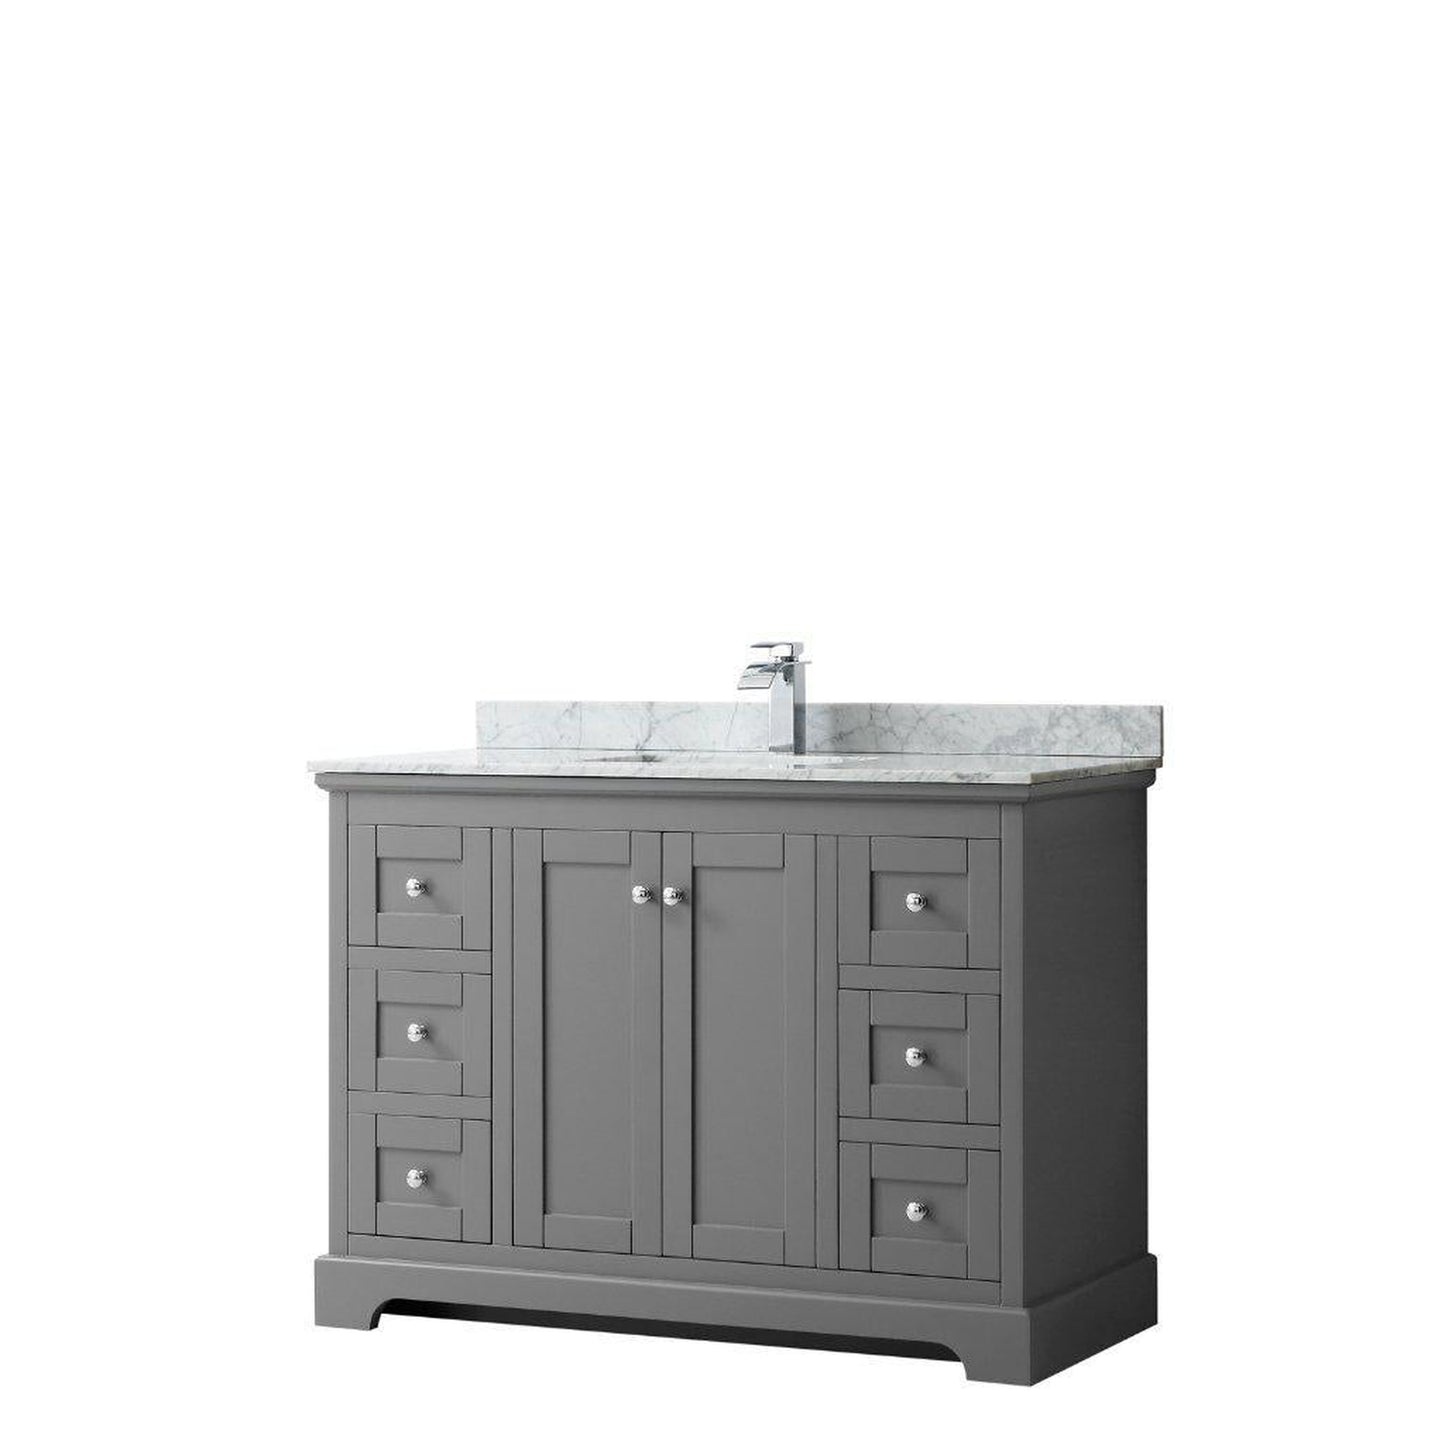 Wyndham Collection Avery 48" Dark Gray Single Bathroom Vanity With White Carrara Marble Countertop With 1-Hole Faucet And Square Sink